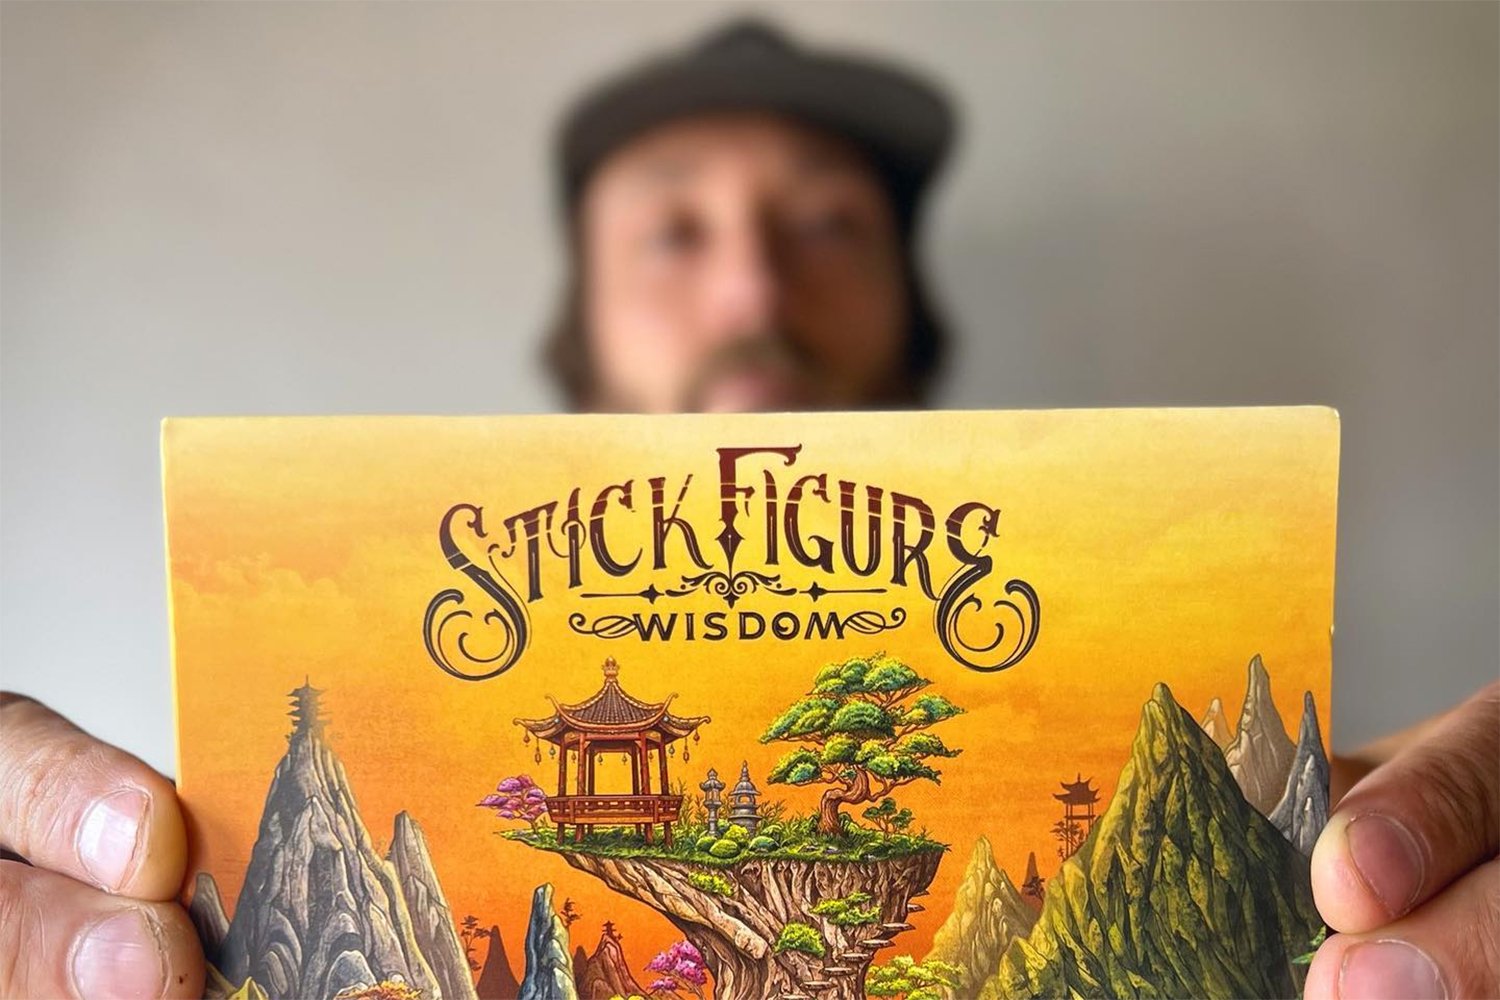 Stick Figure’s ‘Wisdom’ First Album To Debut No. 1 On Billboard Reggae Chart In Over Two Years